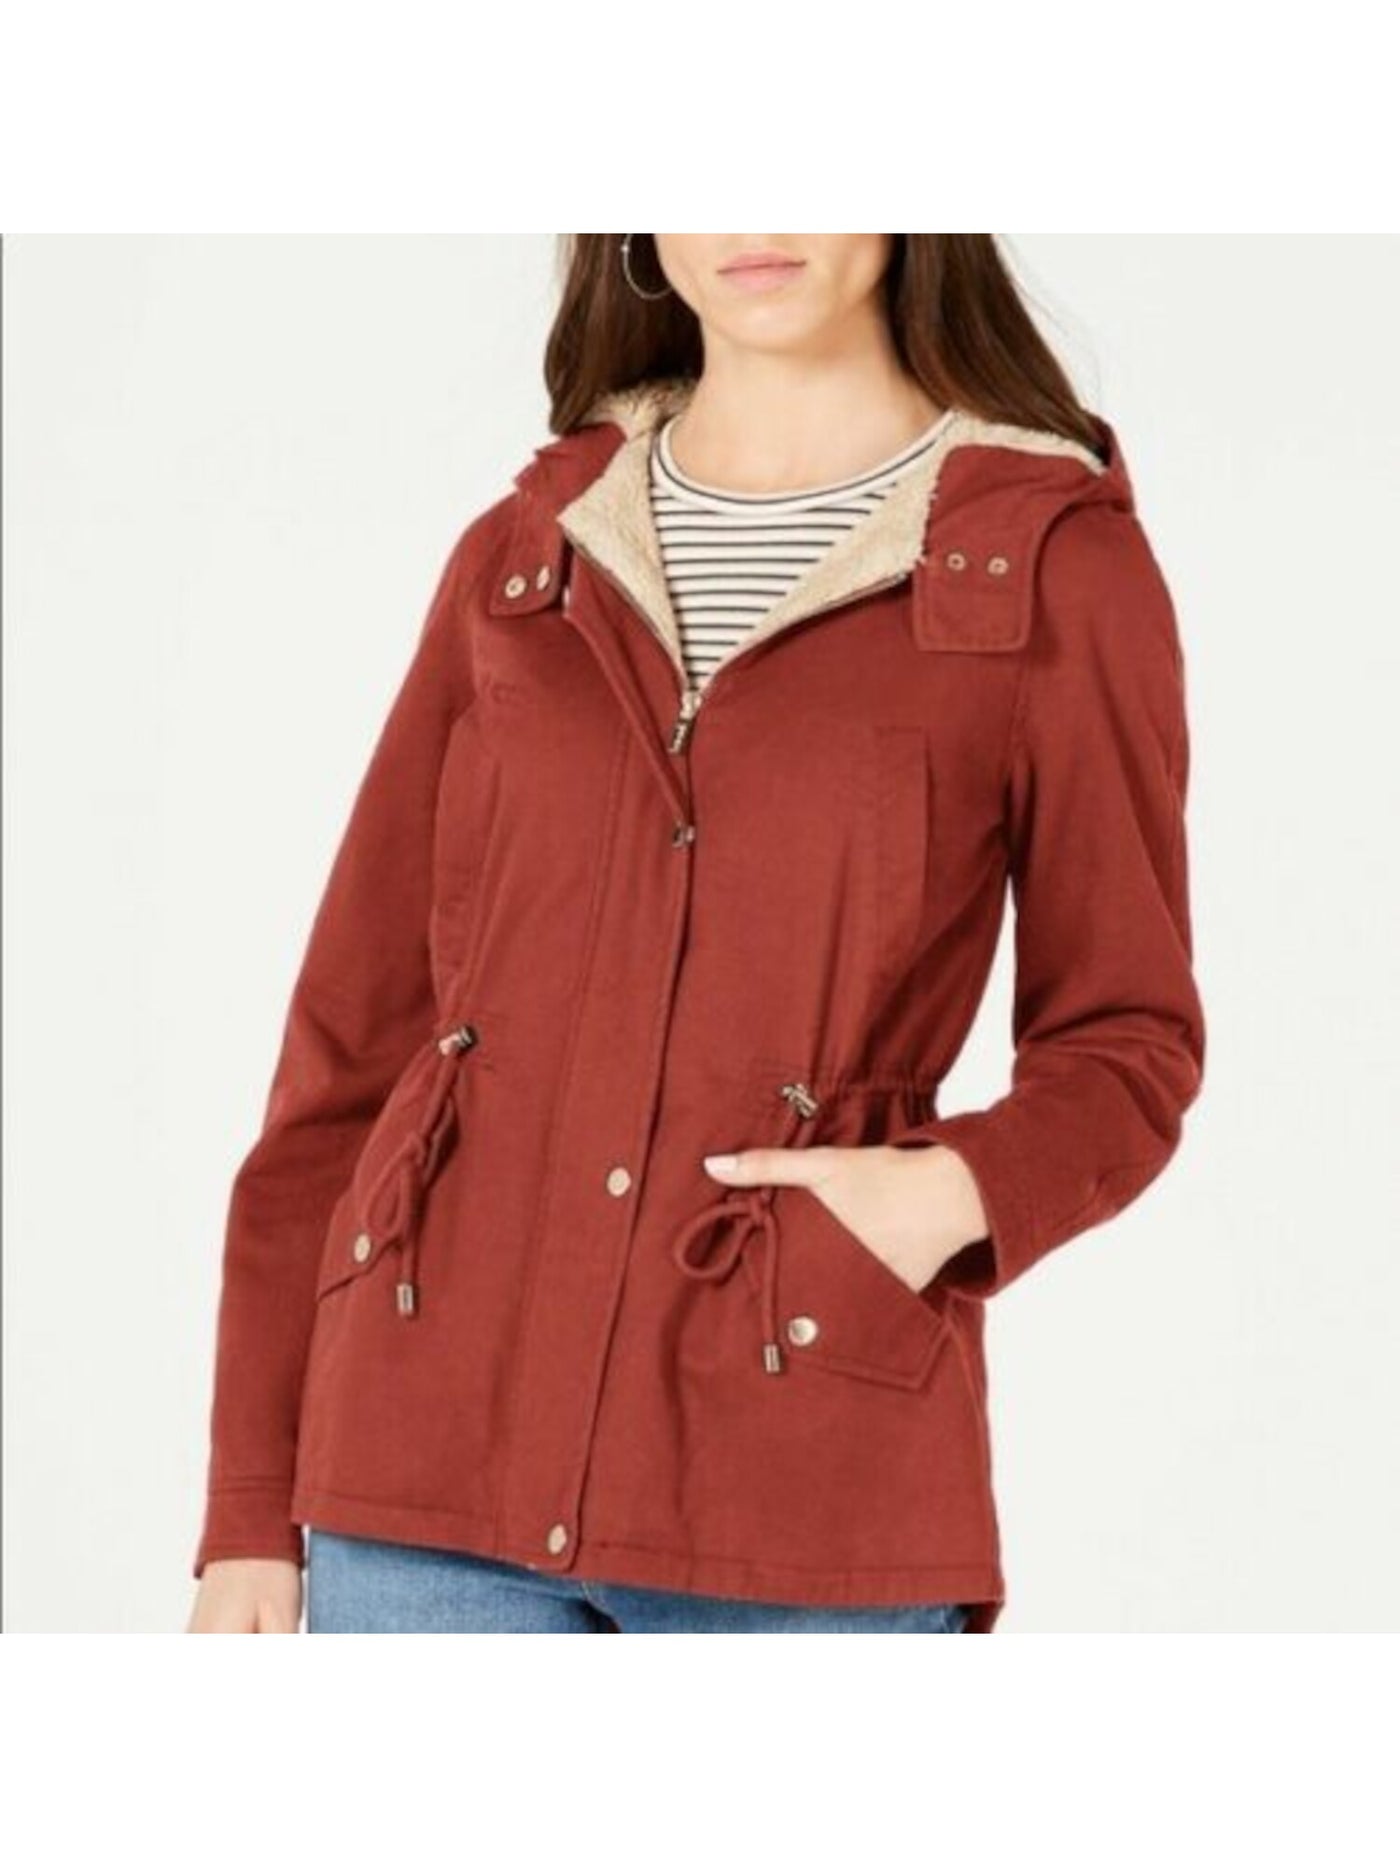 COLLECTIONB Womens Red Pocketed Zippered Hooded Anorak Button Down Jacket XS